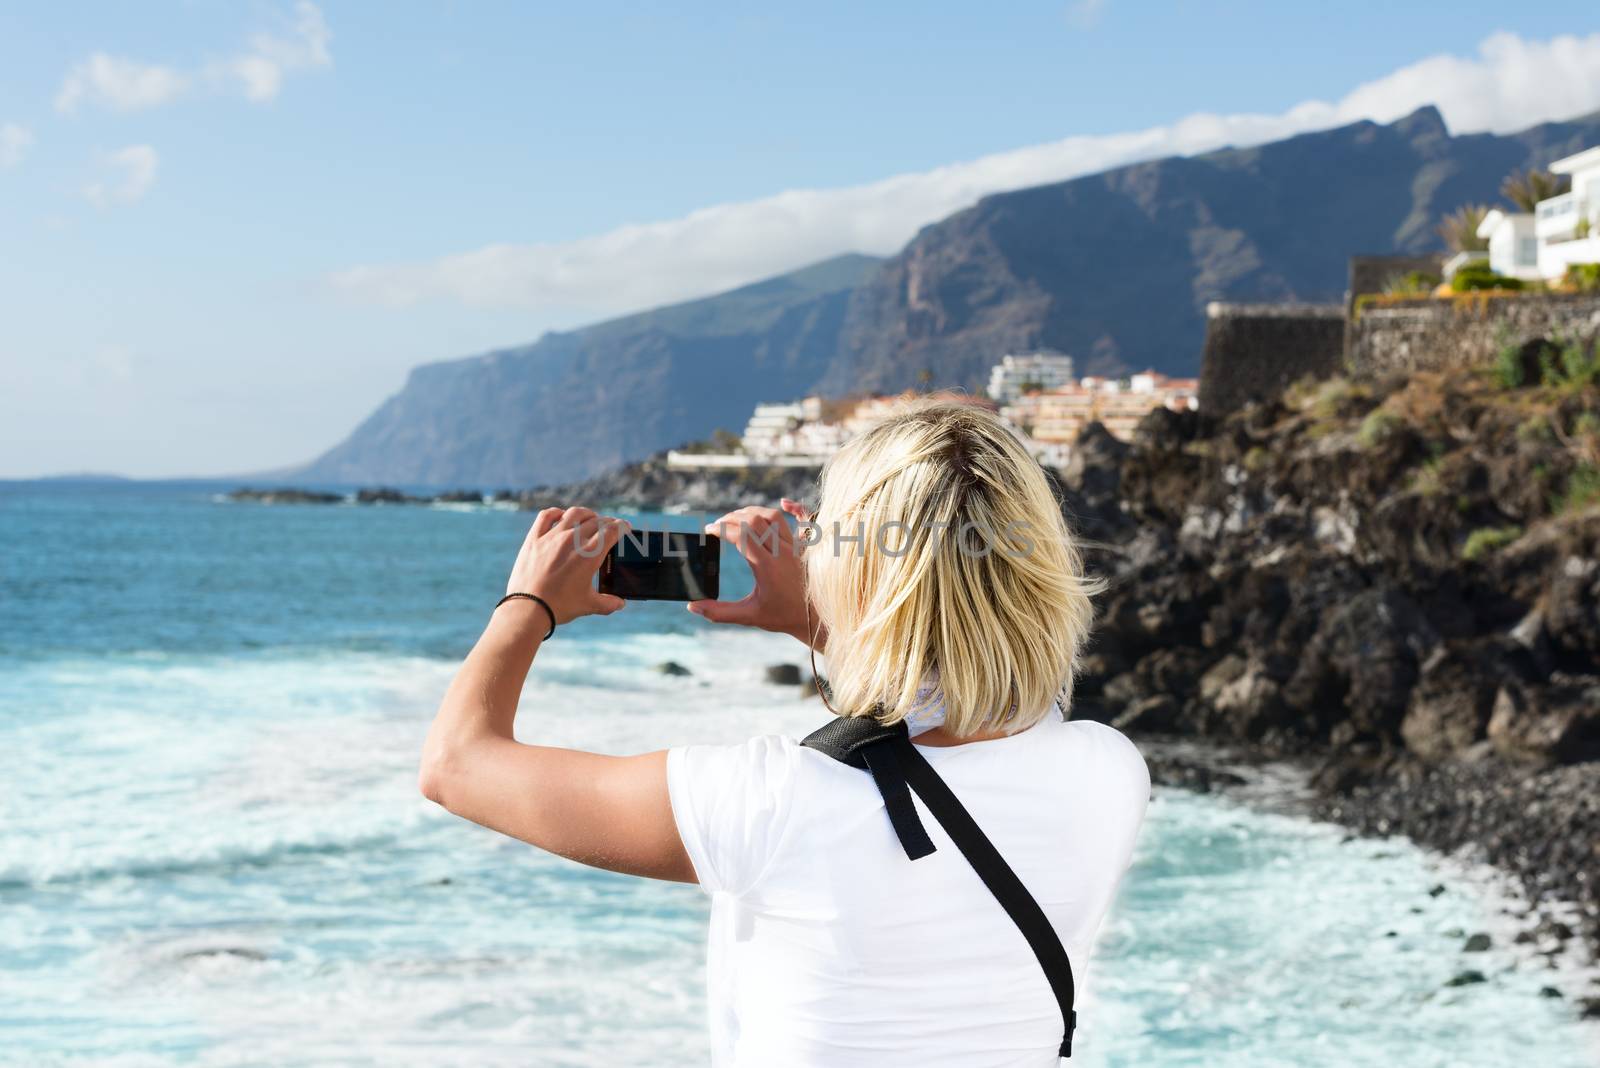 Young blond woman taking pictures of Tenerife coast by Nanisimova